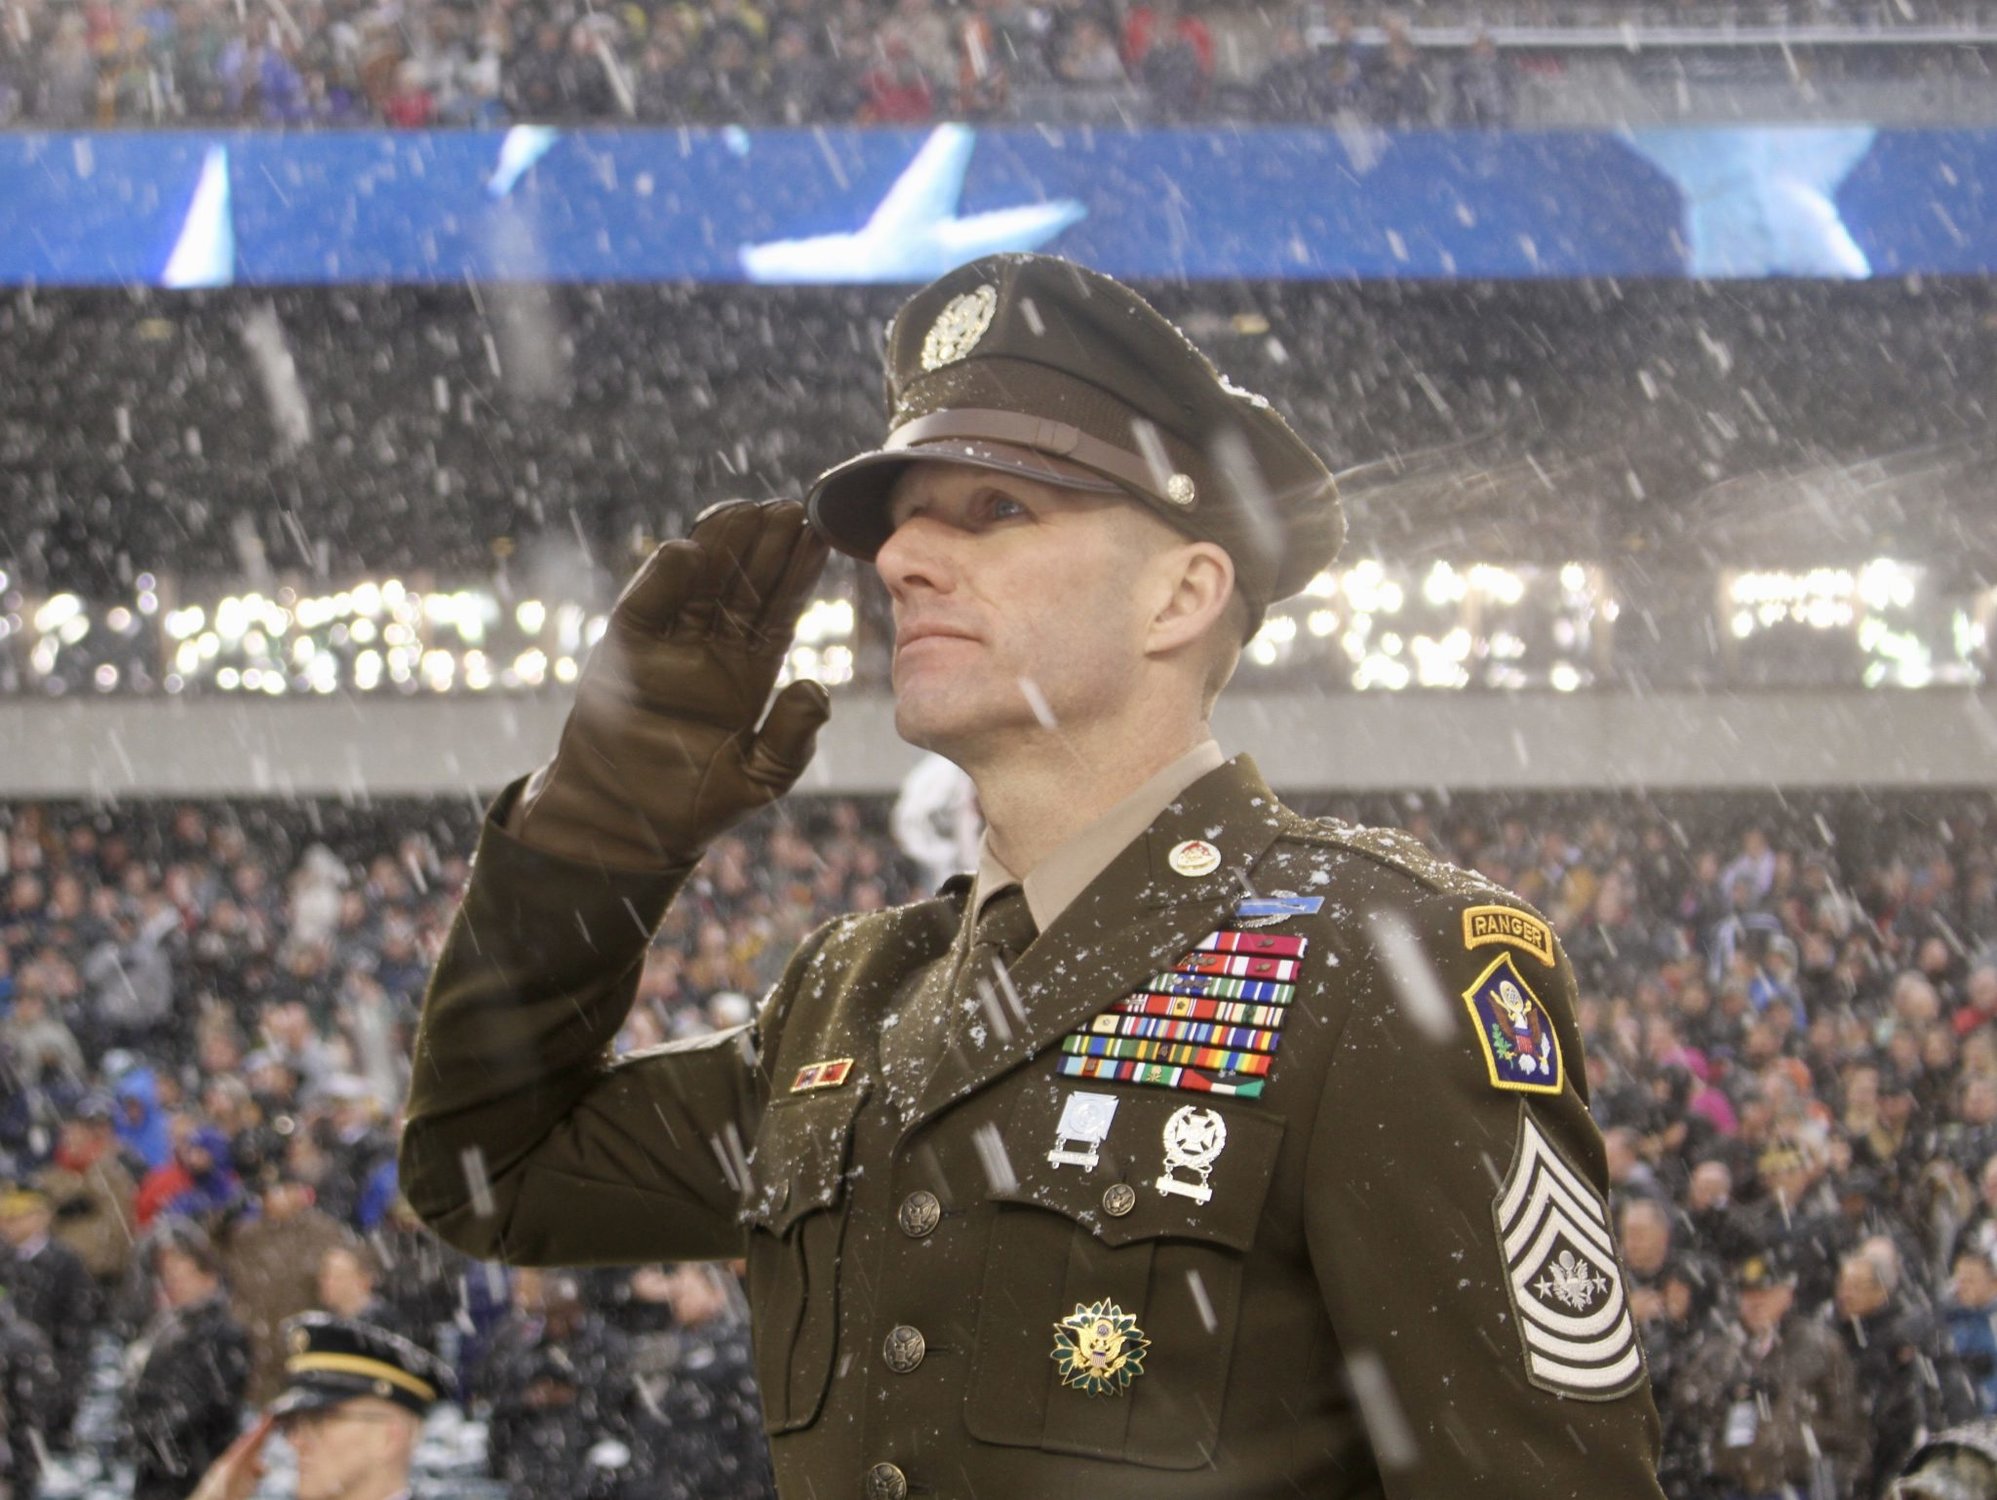 Sergeant Major of the Army Dan Dailey salutes the Anthem pre-kickoff during the Army-Navy game at Lincoln Financial Field in Philadelphia, Pennsylvania Dec. 9, 2017. SMA Dailey displayed the Army’s proposed ‘Pink and Green’ daily service uniform, modeled after the Army’s standard World War II-era dress uniform. (U.S. Army photo by Ronald Lee)